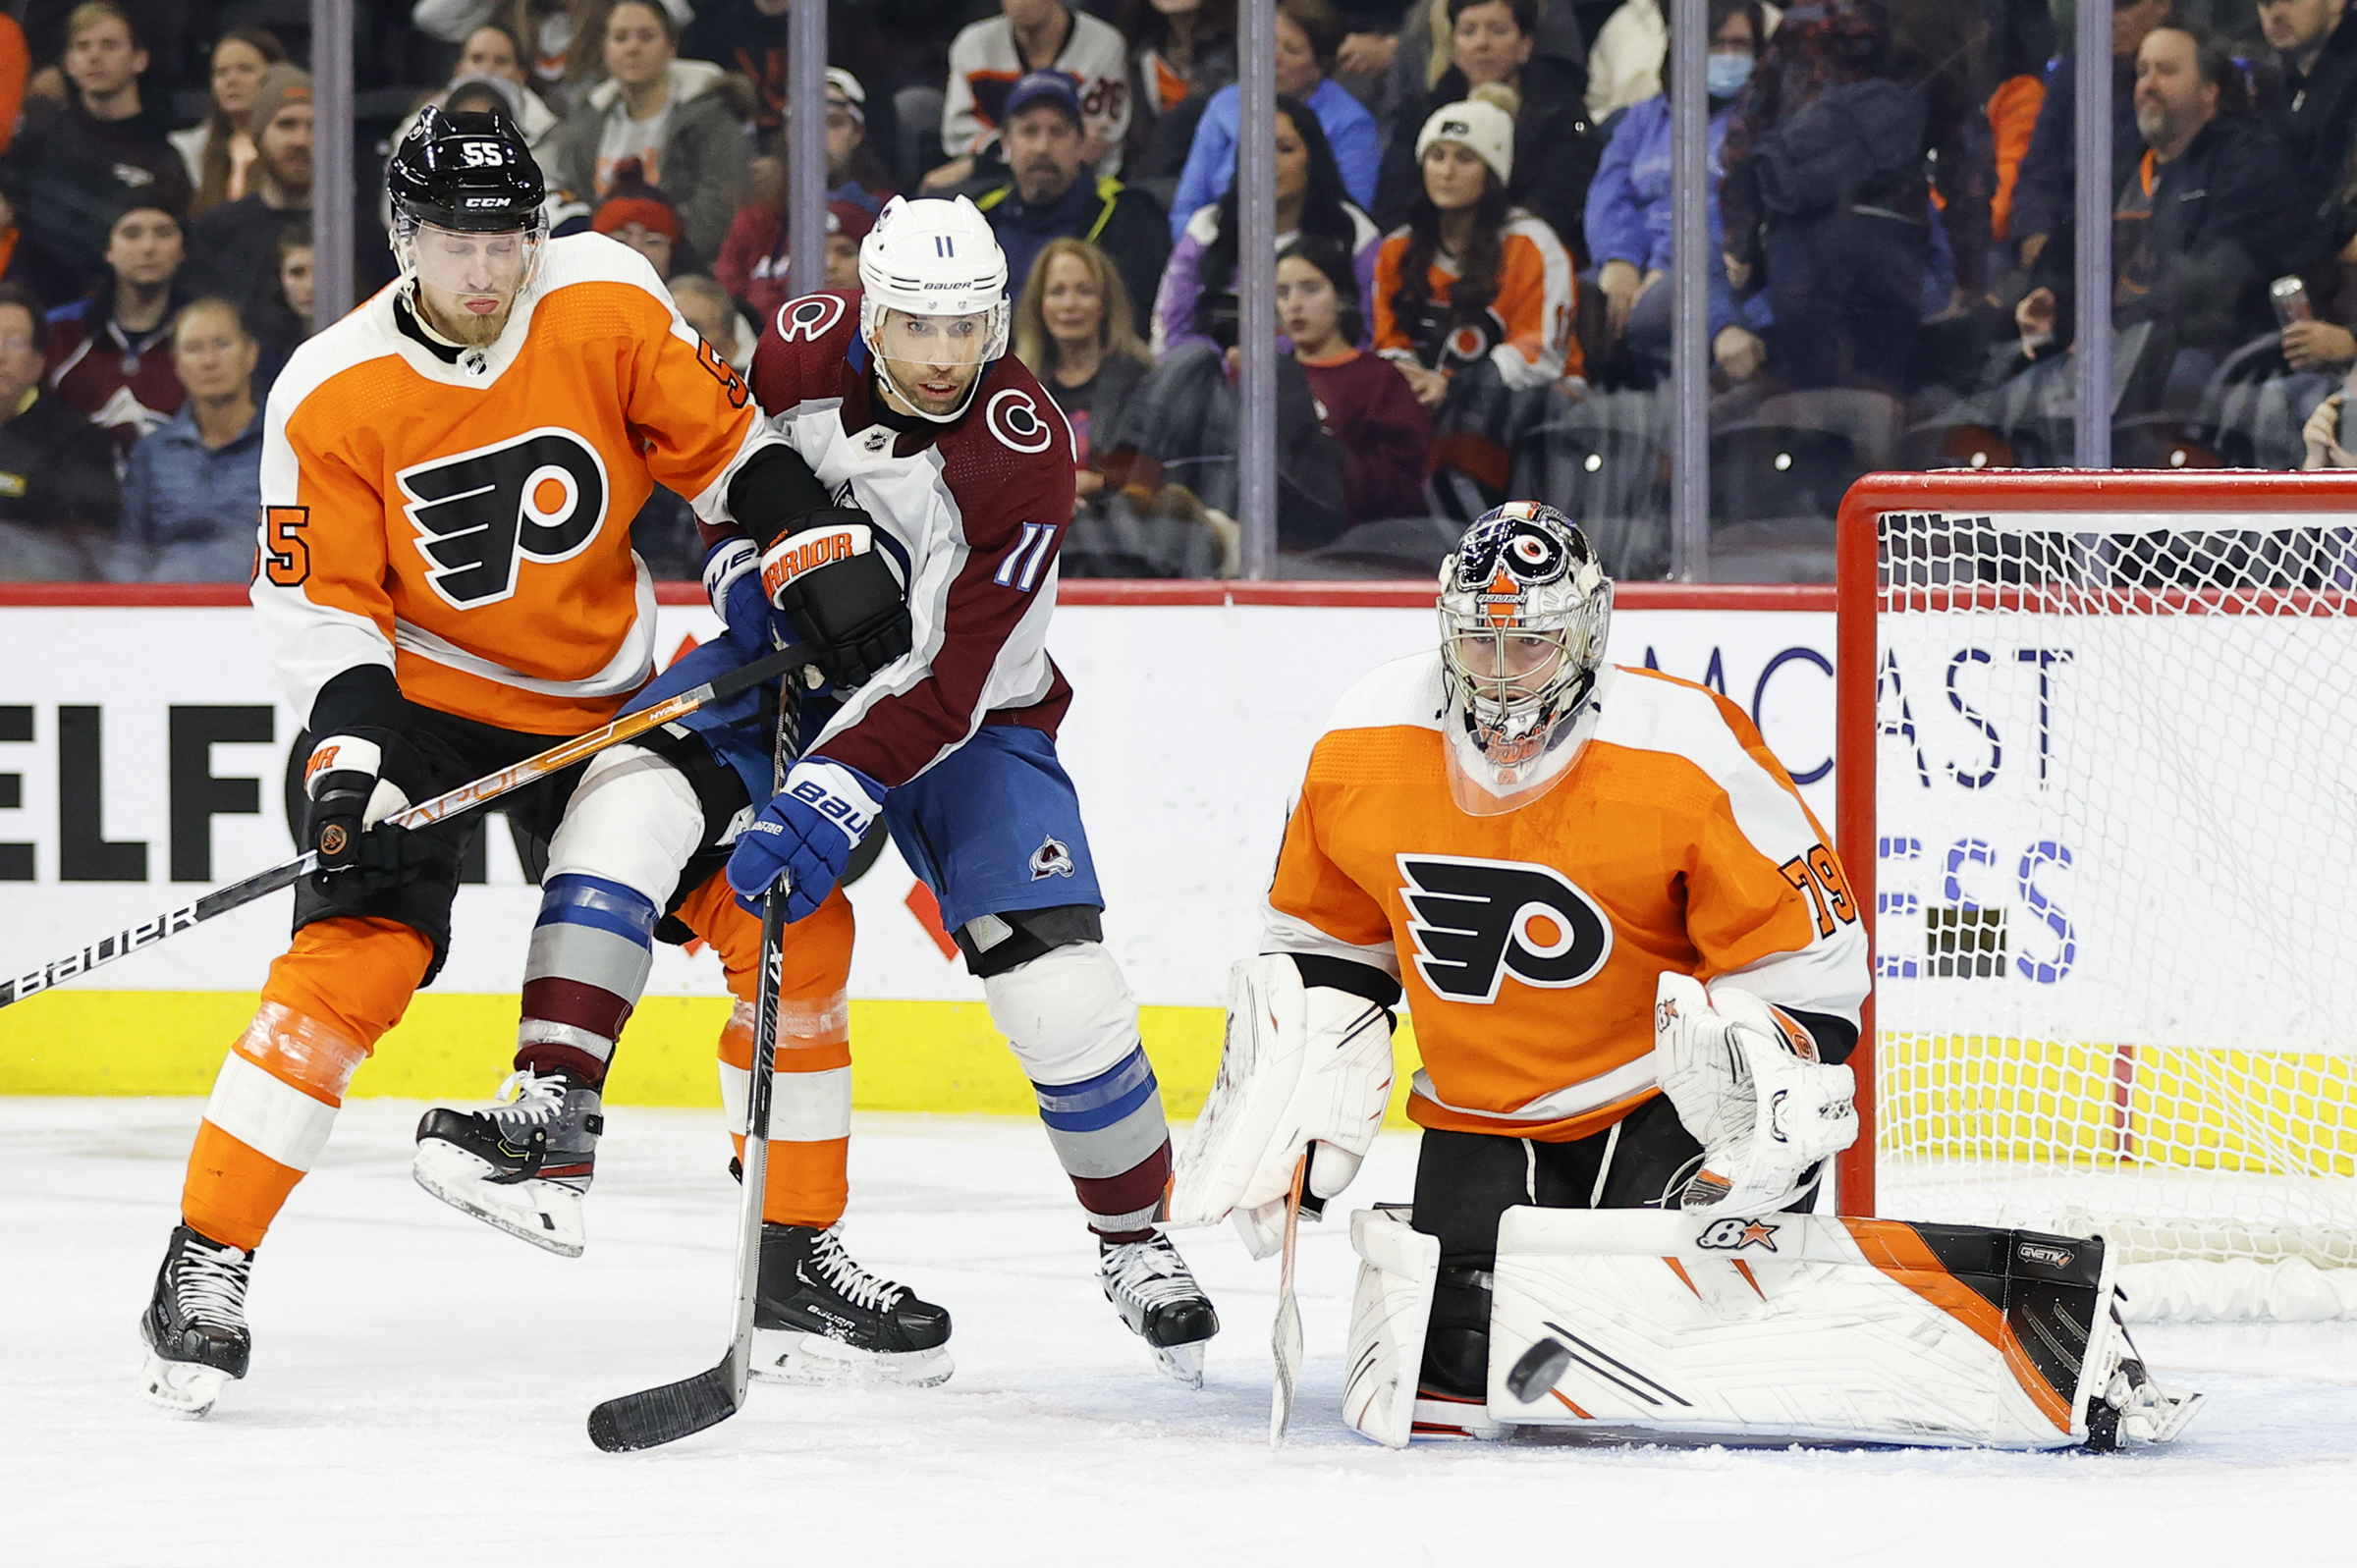 Flyers defeat the injury-plagued Colorado Avalanche, 5-3